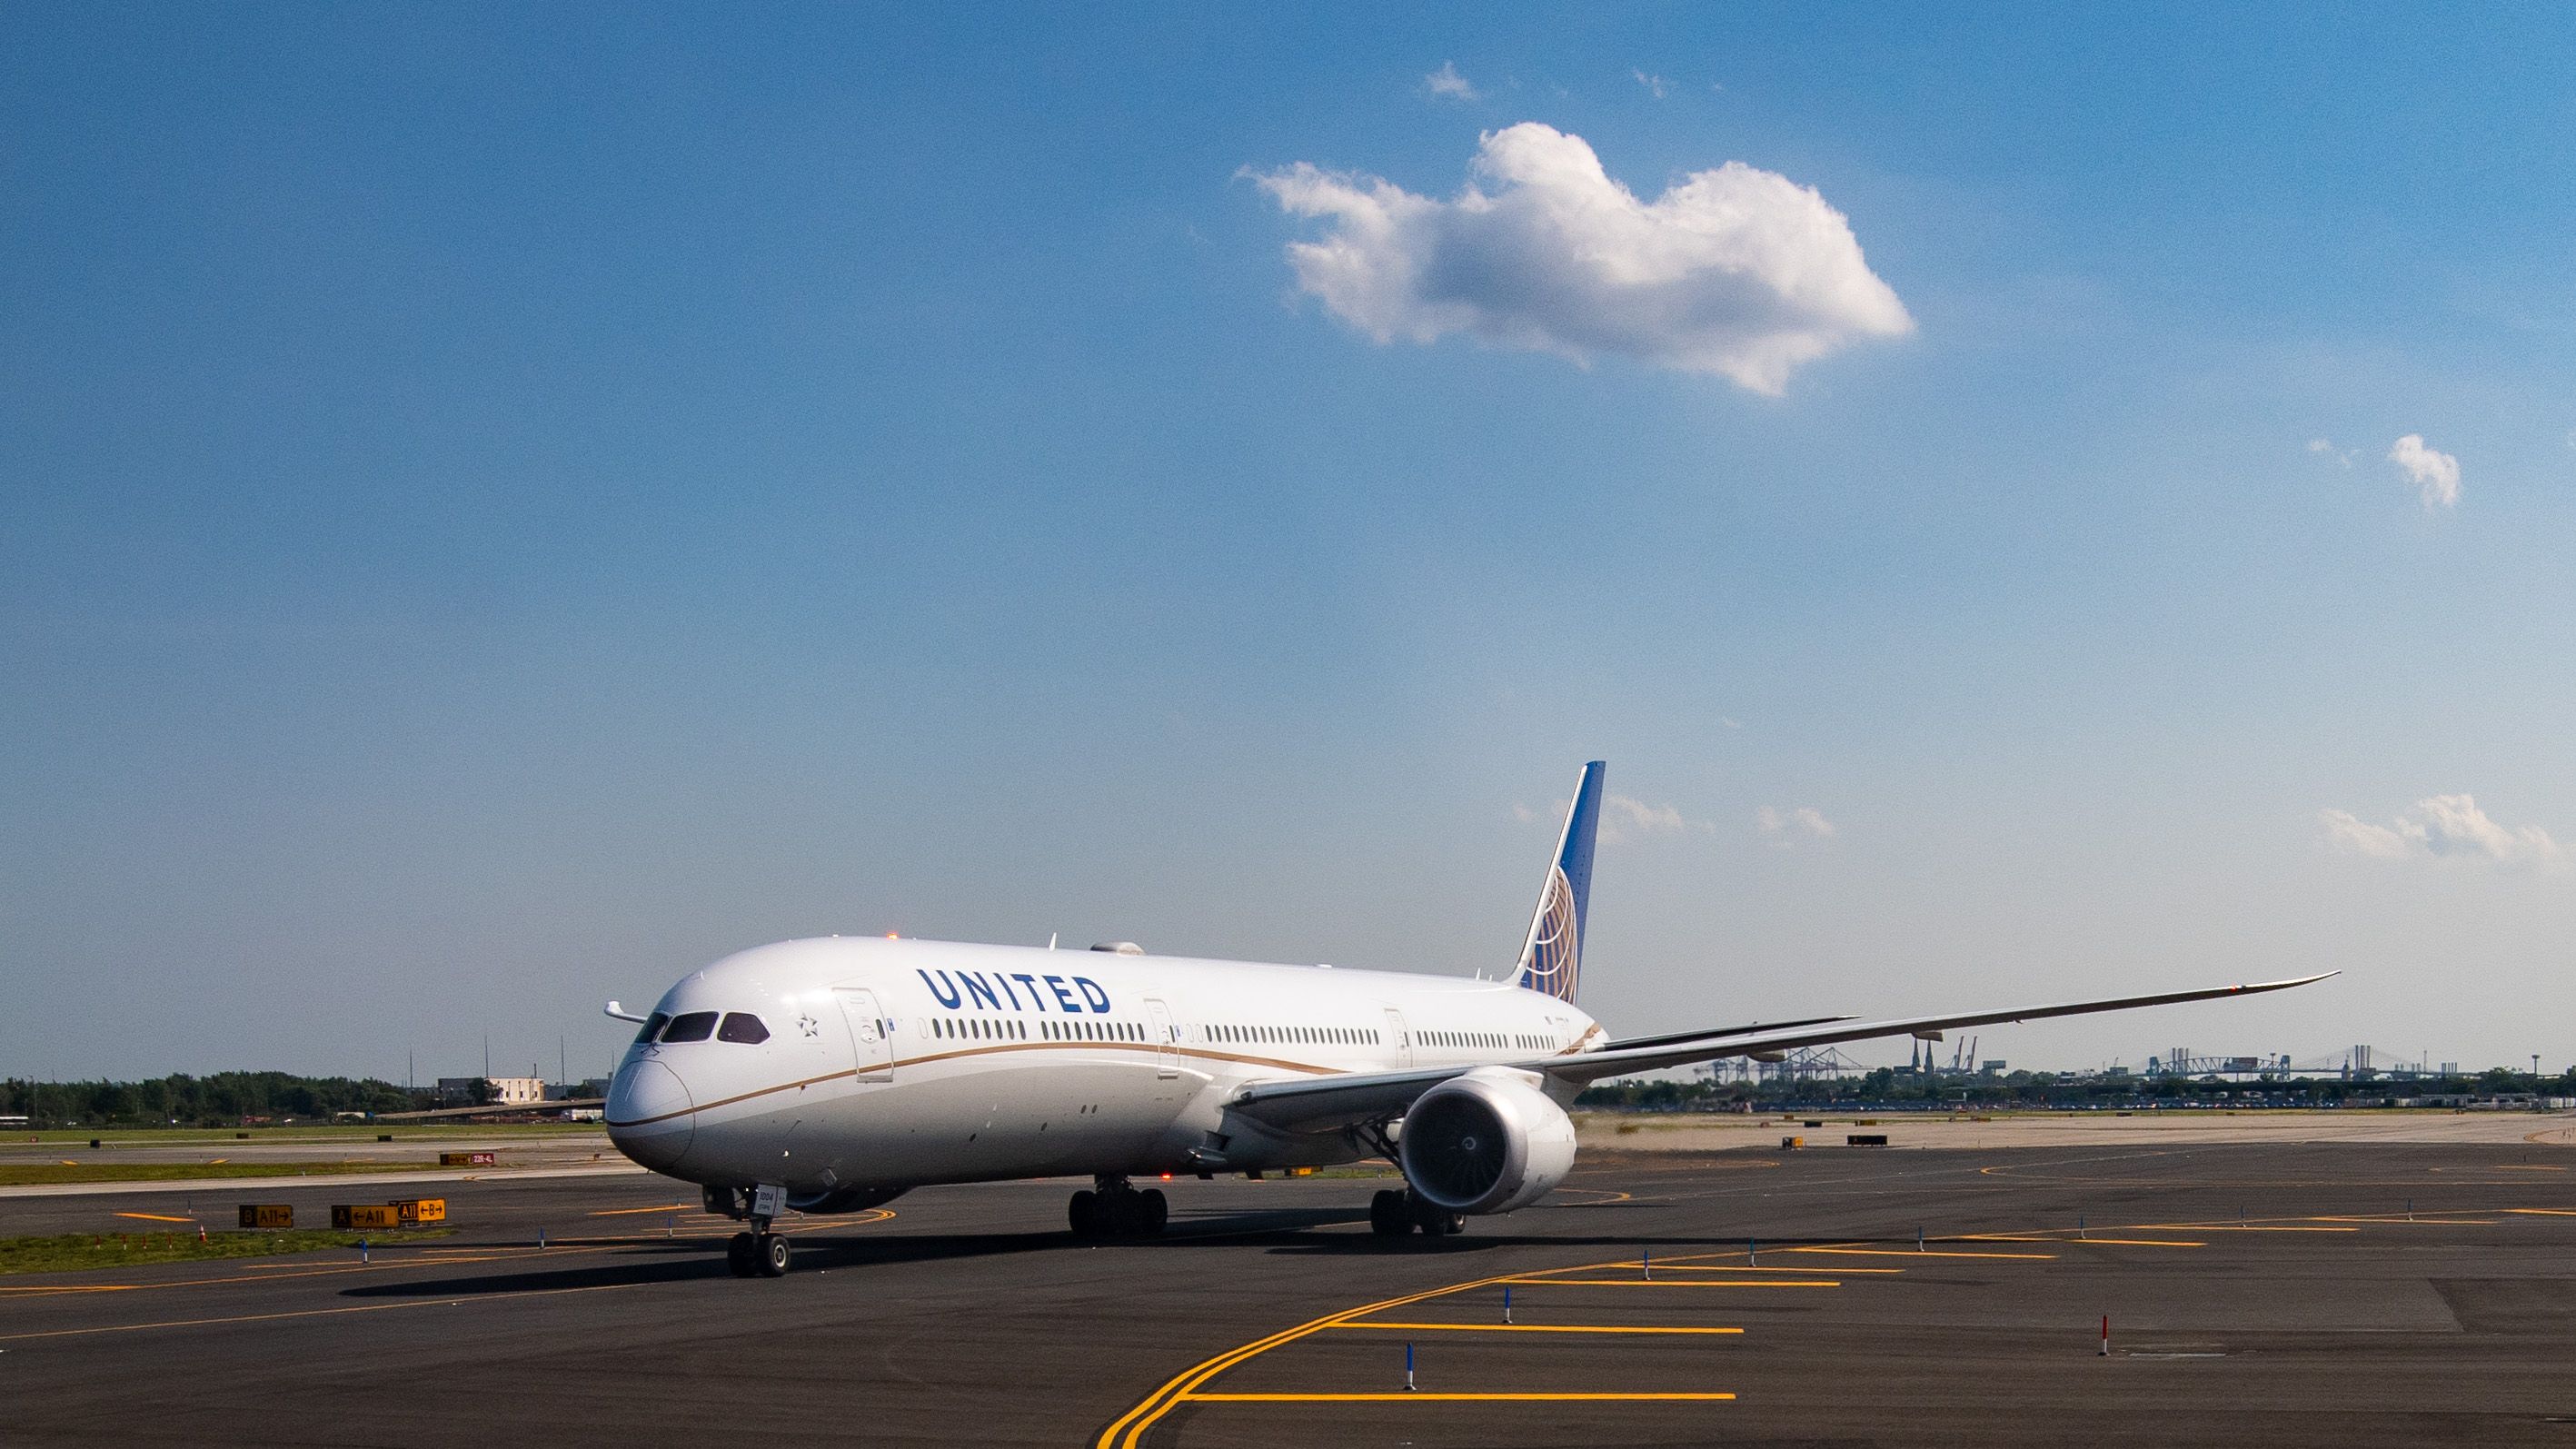 White Boeing 787 jetliner with United in blue lettering on the side sitting on taxiway